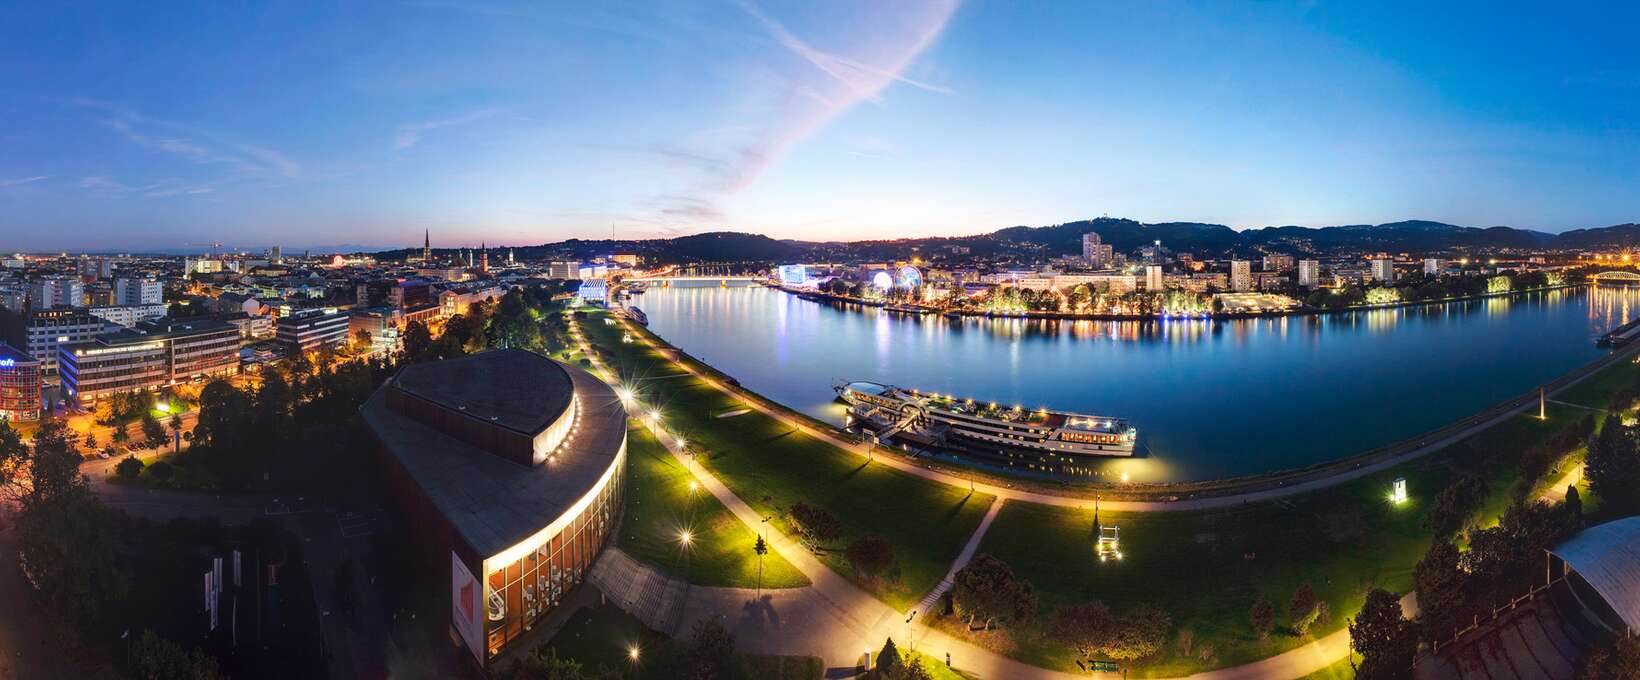 Panorama per night with river  | Linz | © Linz Tourismus | J. Steininger